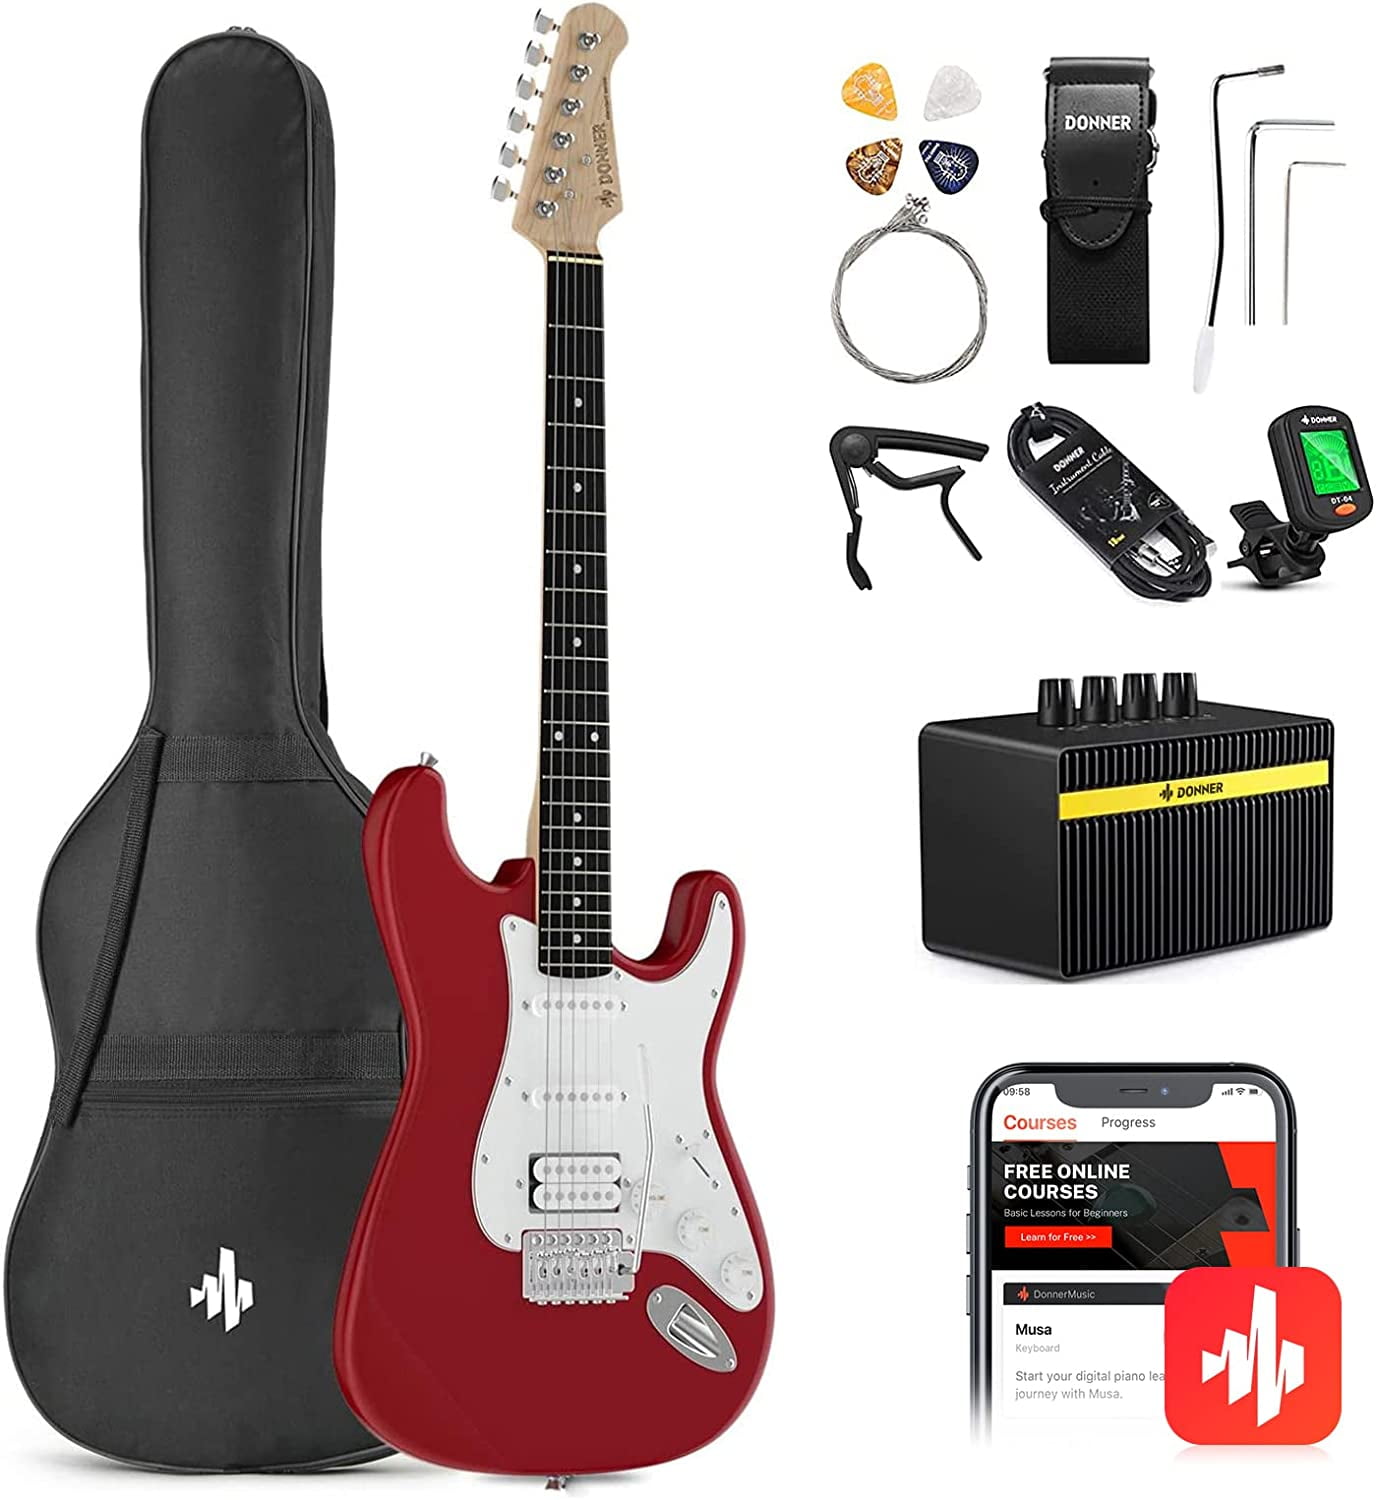 Blue Electric Guitar Kit 39 Guitar with Bag Tremolo Arm Strap Portable Musical Instrument for Guitarist 